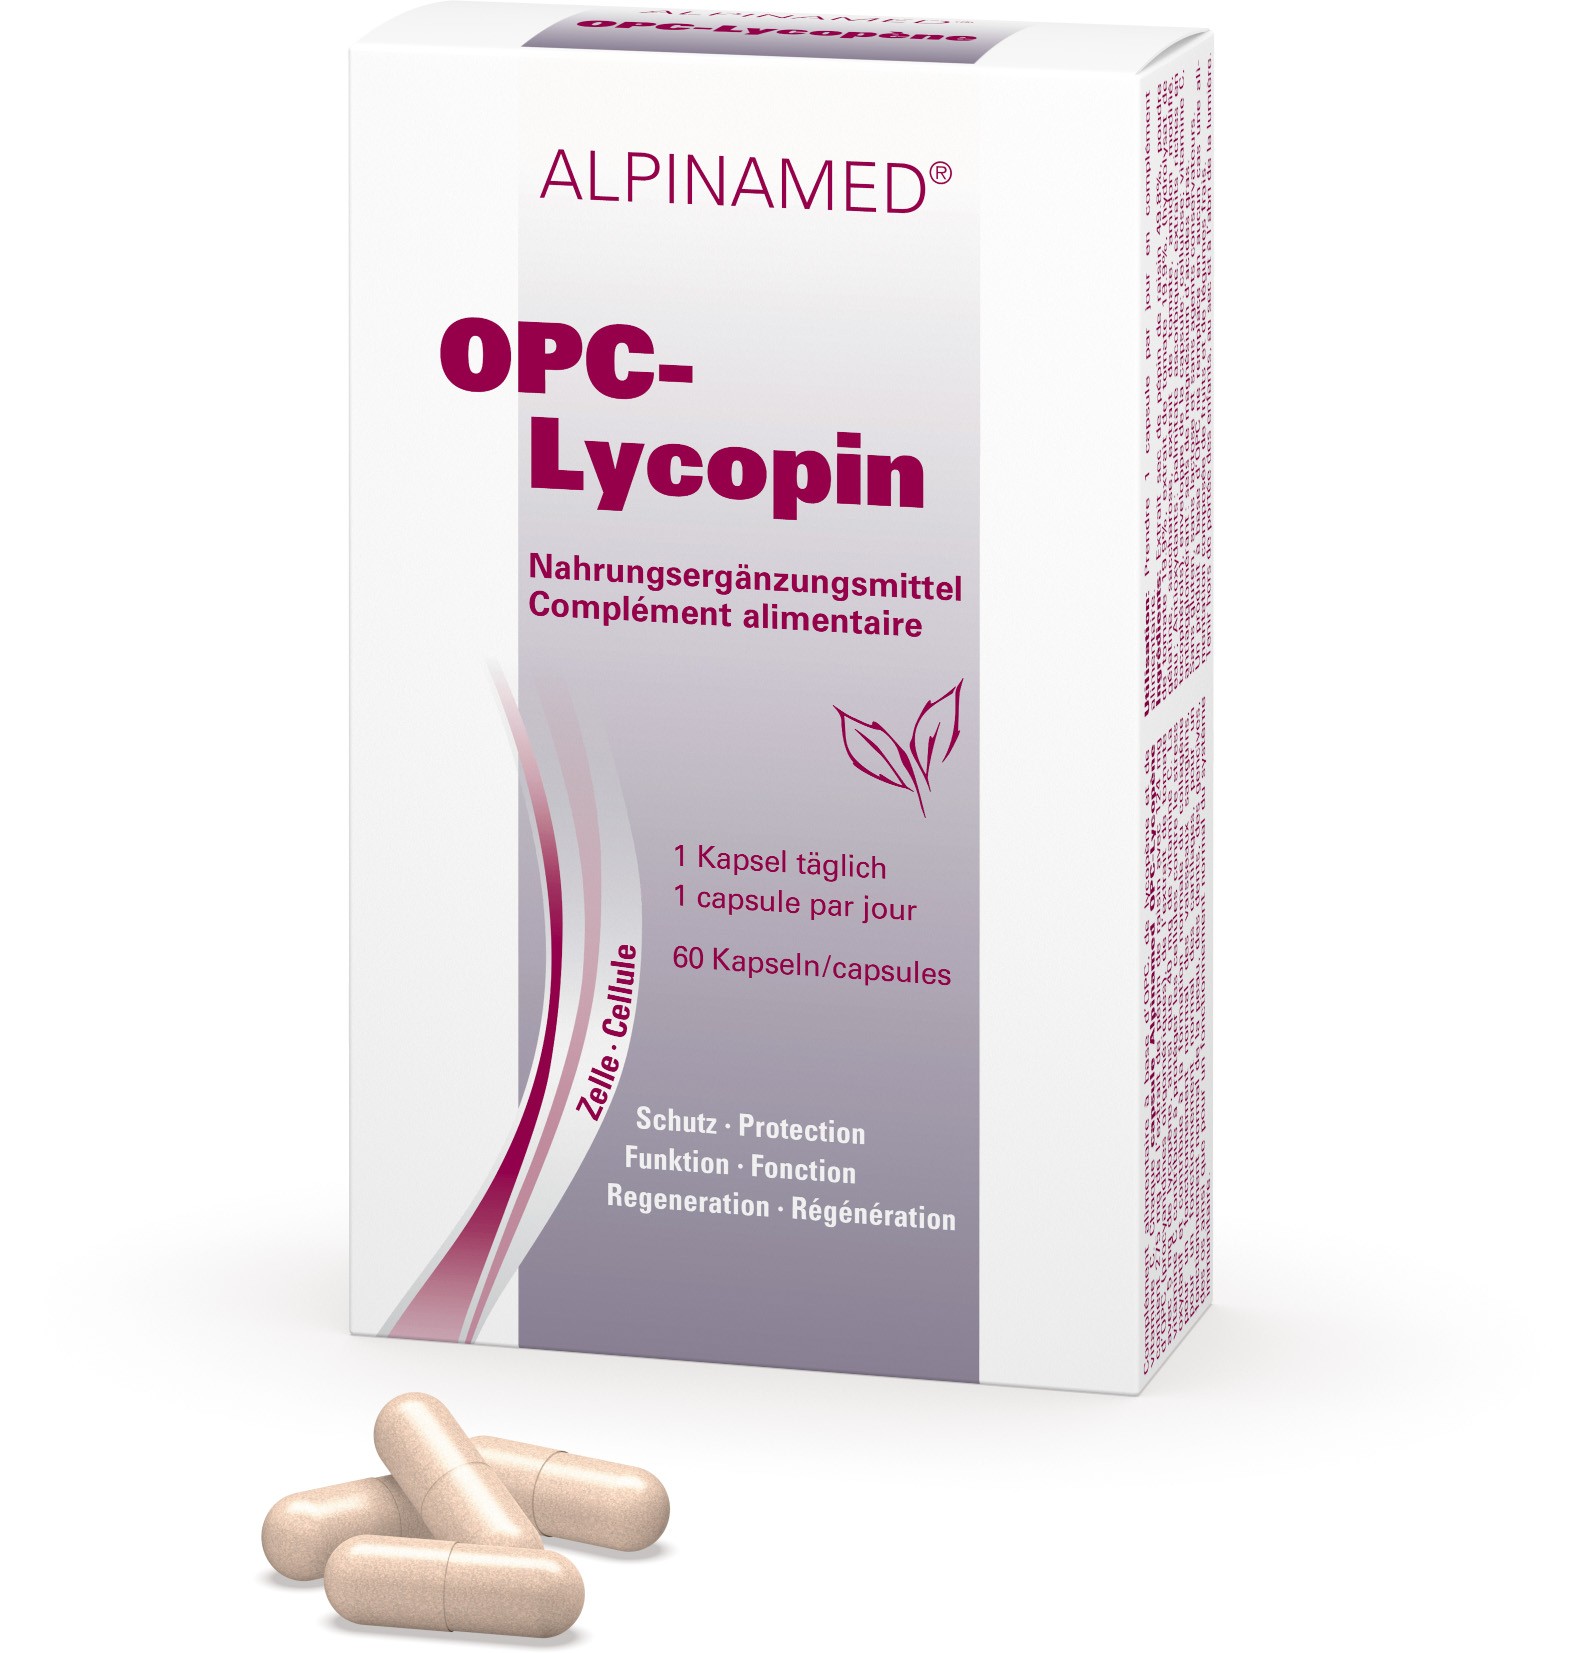 Image of Alpinamed OPC-Lycopin (60 Stk)